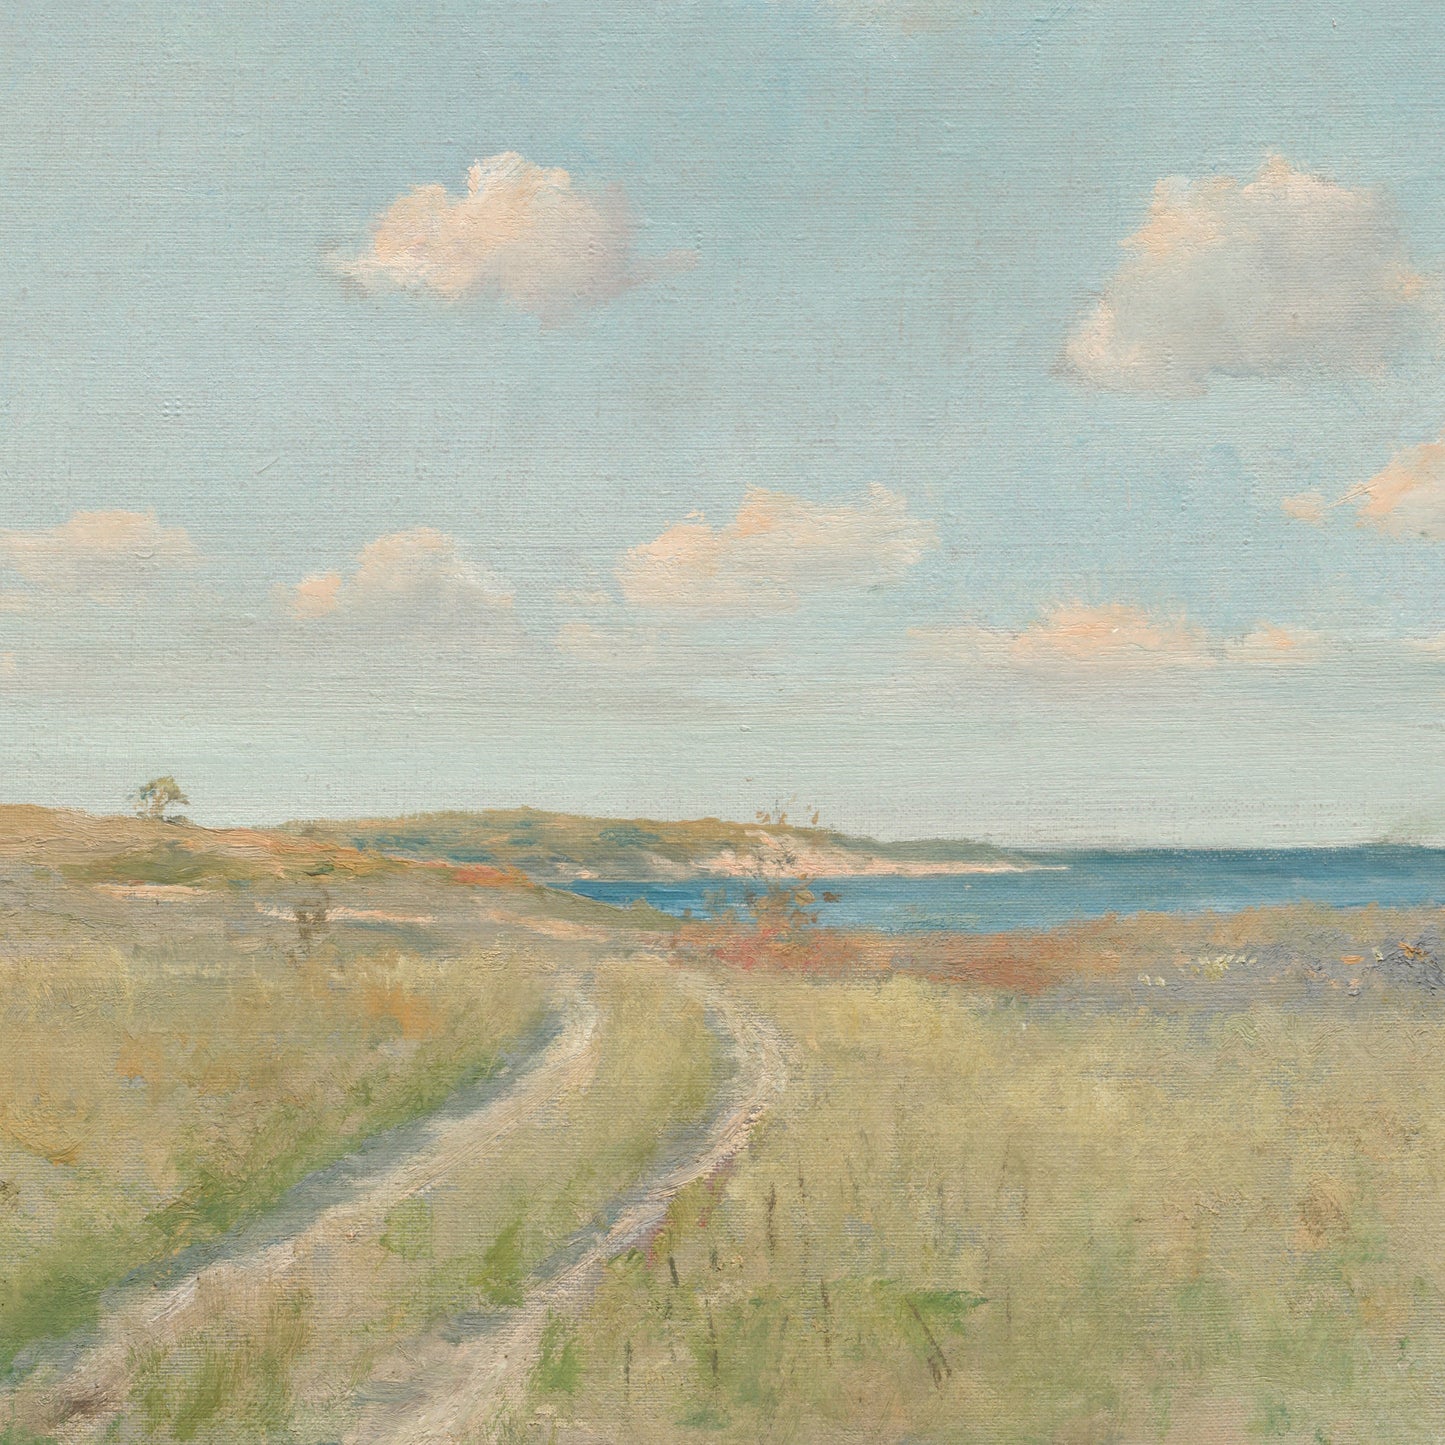 The Old Road to the Sea - William Merritt Chase, 3d Printed with texture and brush strokes looks like original oil-painting, code:801